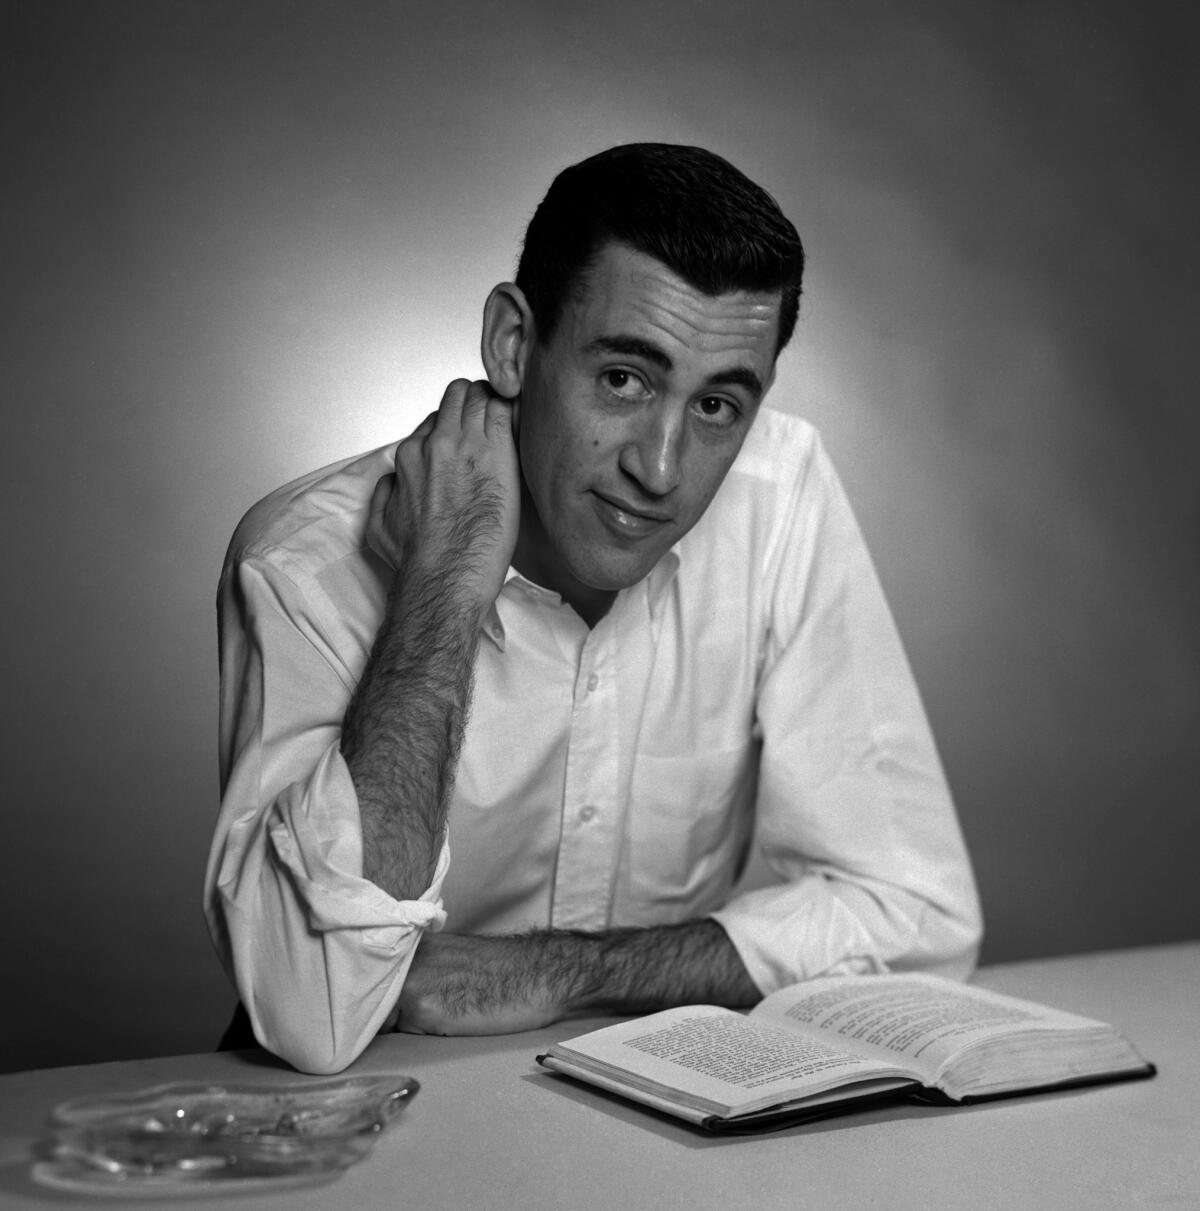 JD Salinger posed for a portrait on November 20, 1952 in Brooklyn.